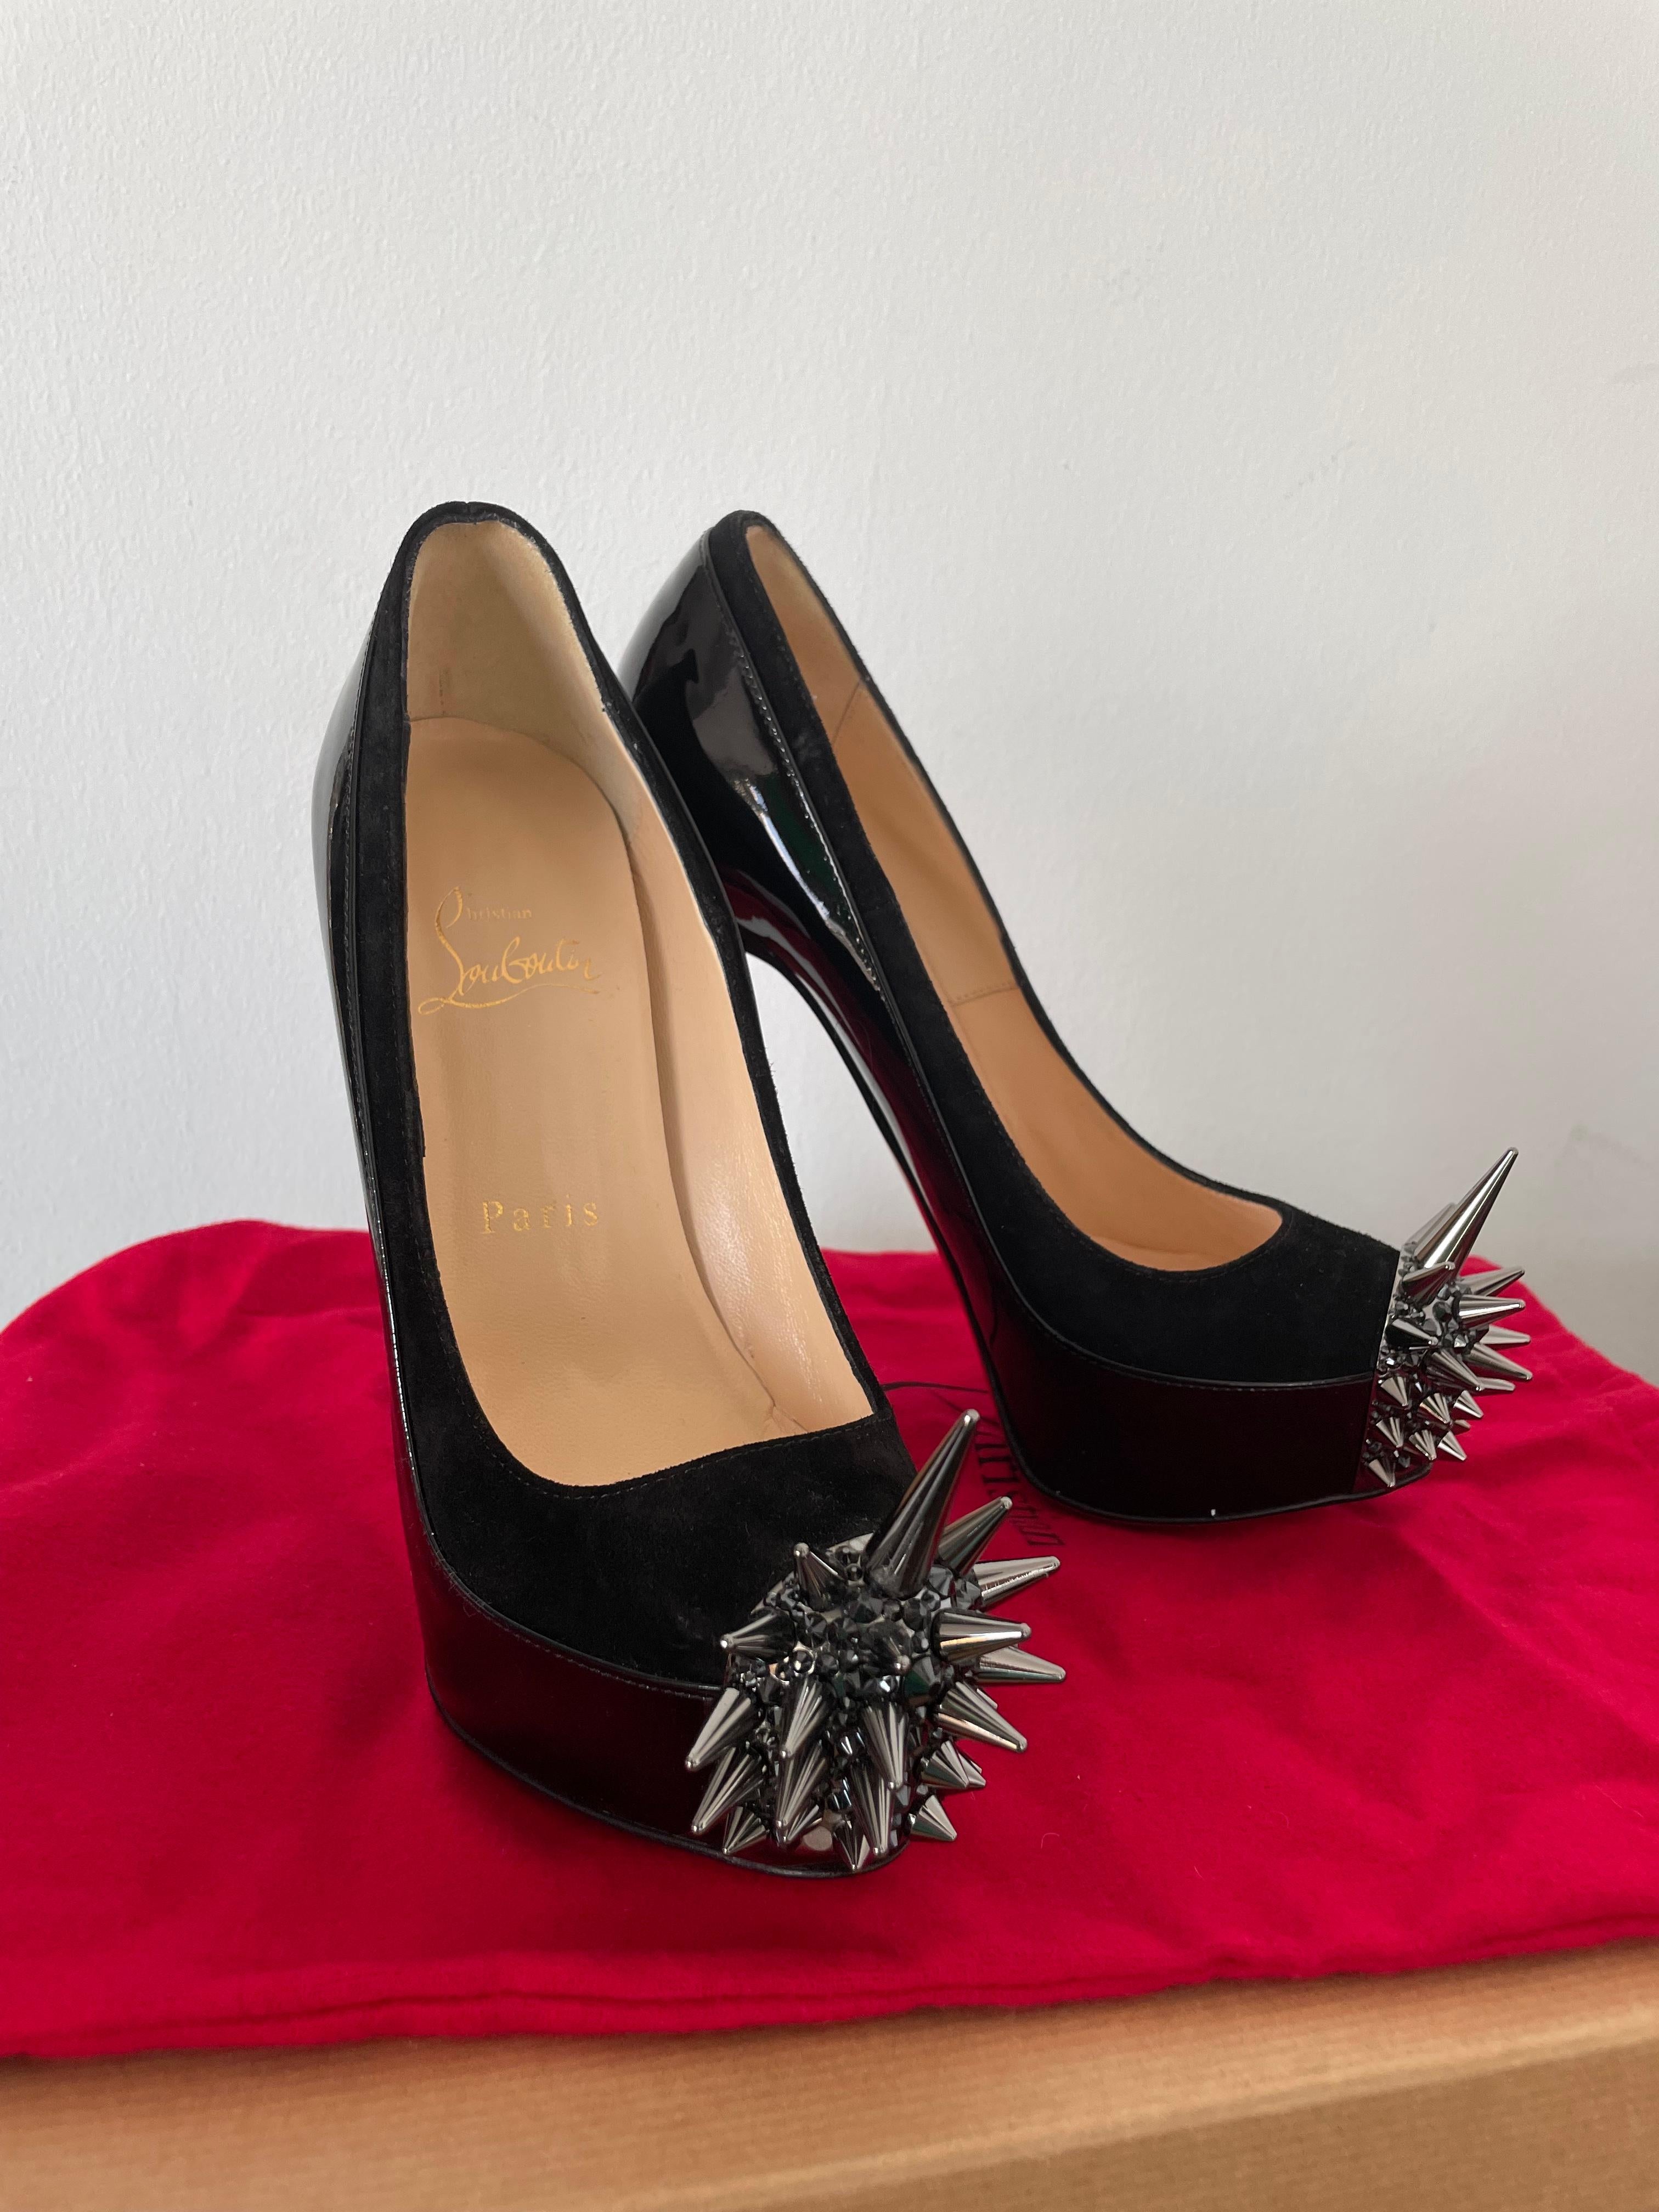 Christian Louboutin Asteroid 160 Black Patent with spike toe  size 35.5 For Sale 1